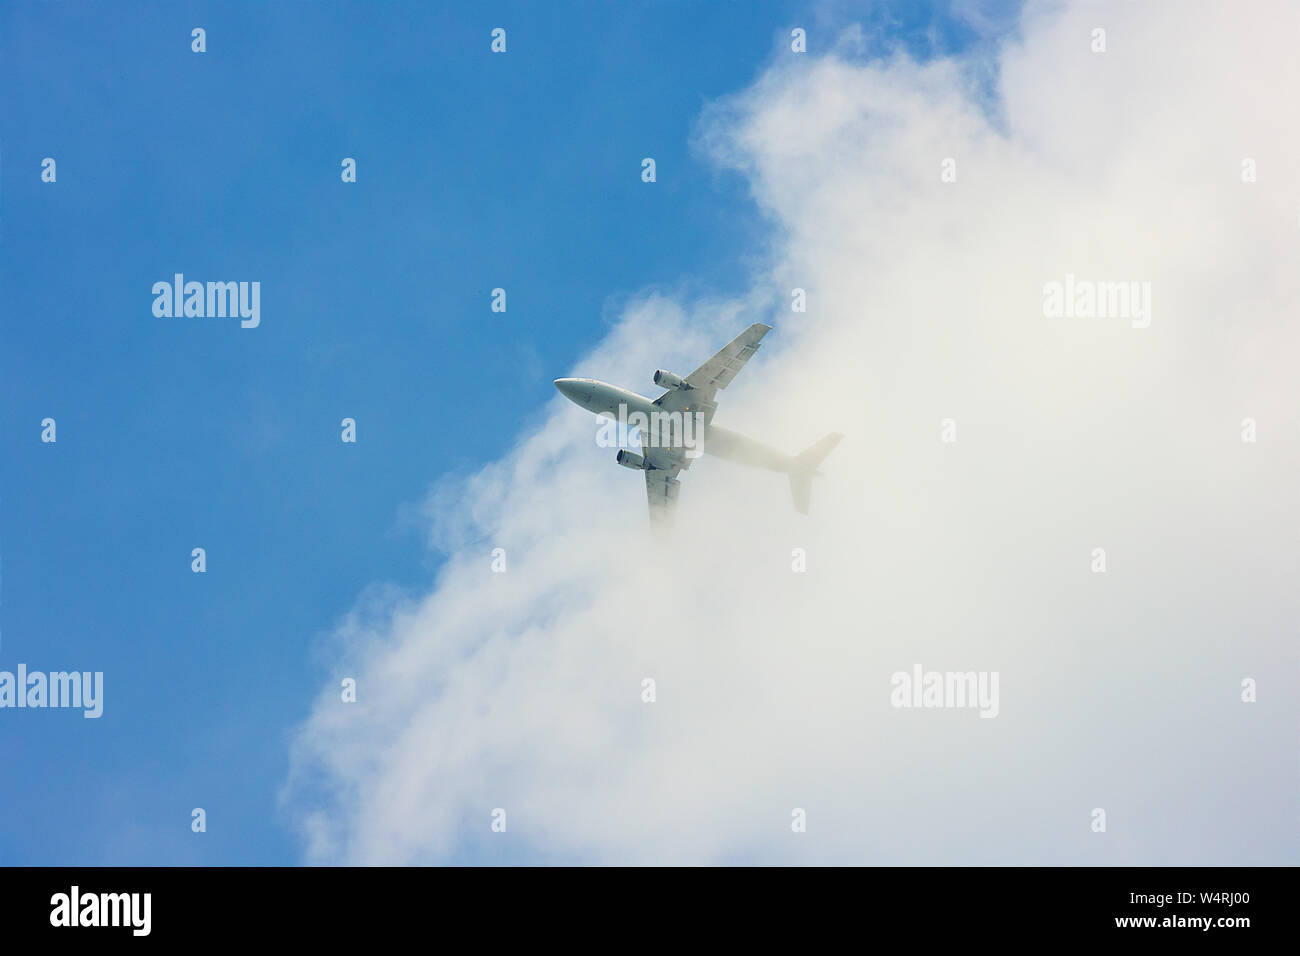 White jet emerging from clouds in sky, UK Stock Photo